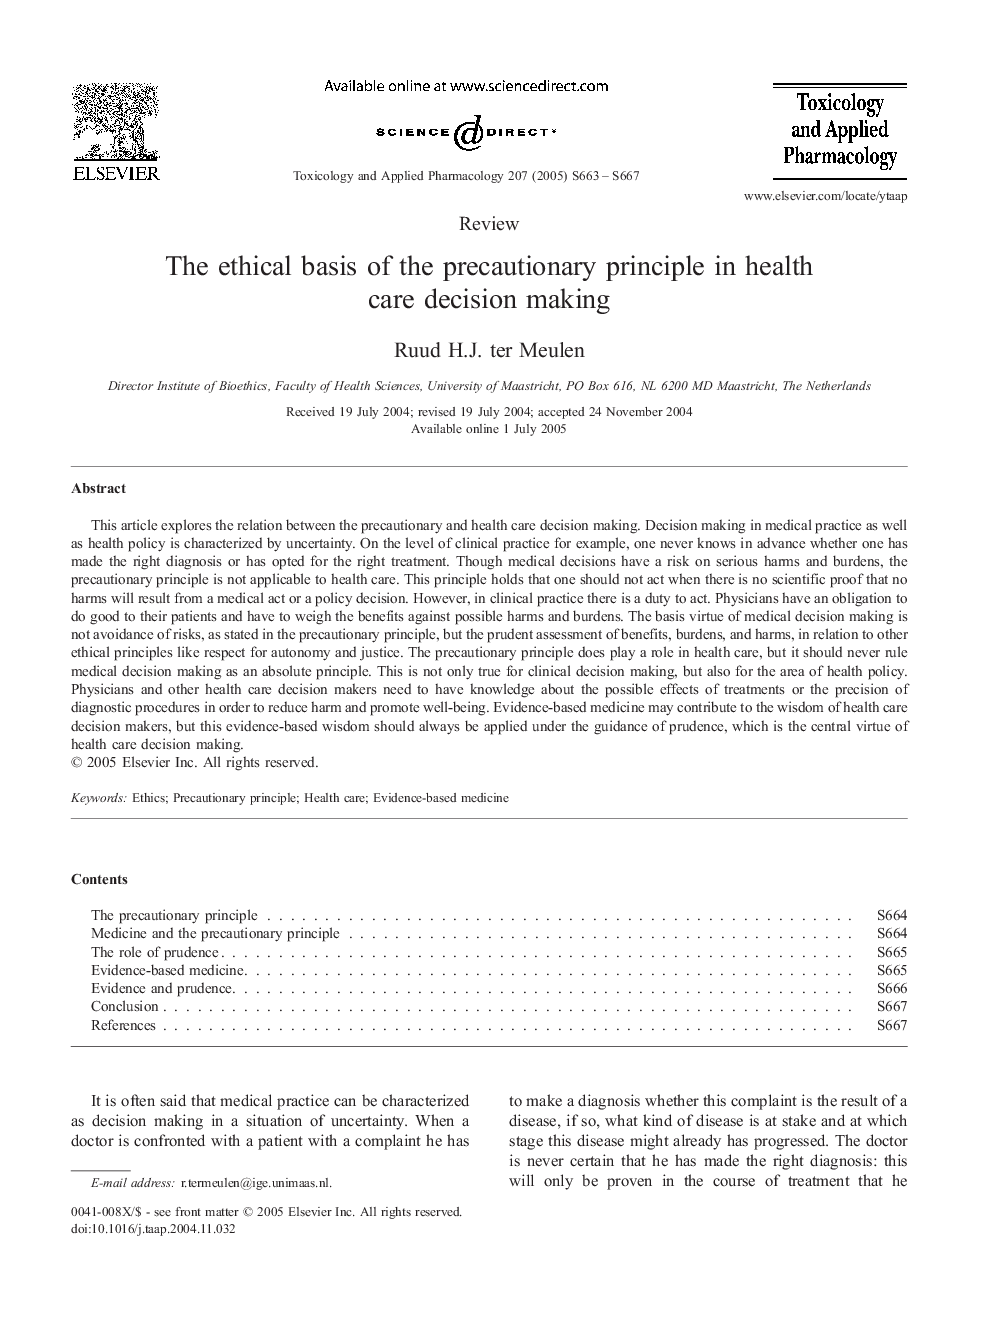 The ethical basis of the precautionary principle in health care decision making